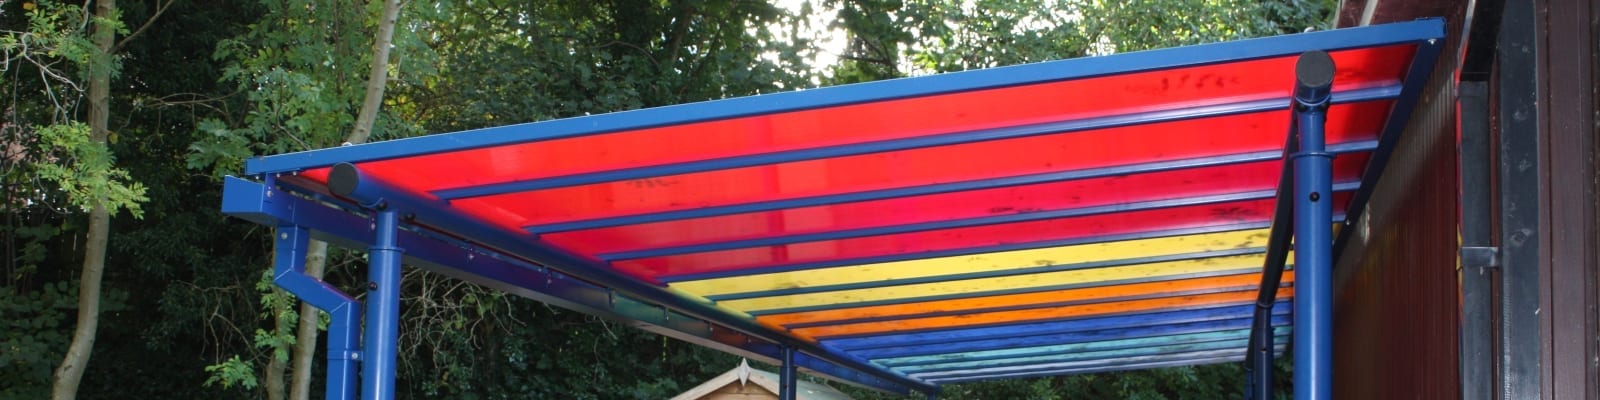 Coleham Primary School Colourful Shelter